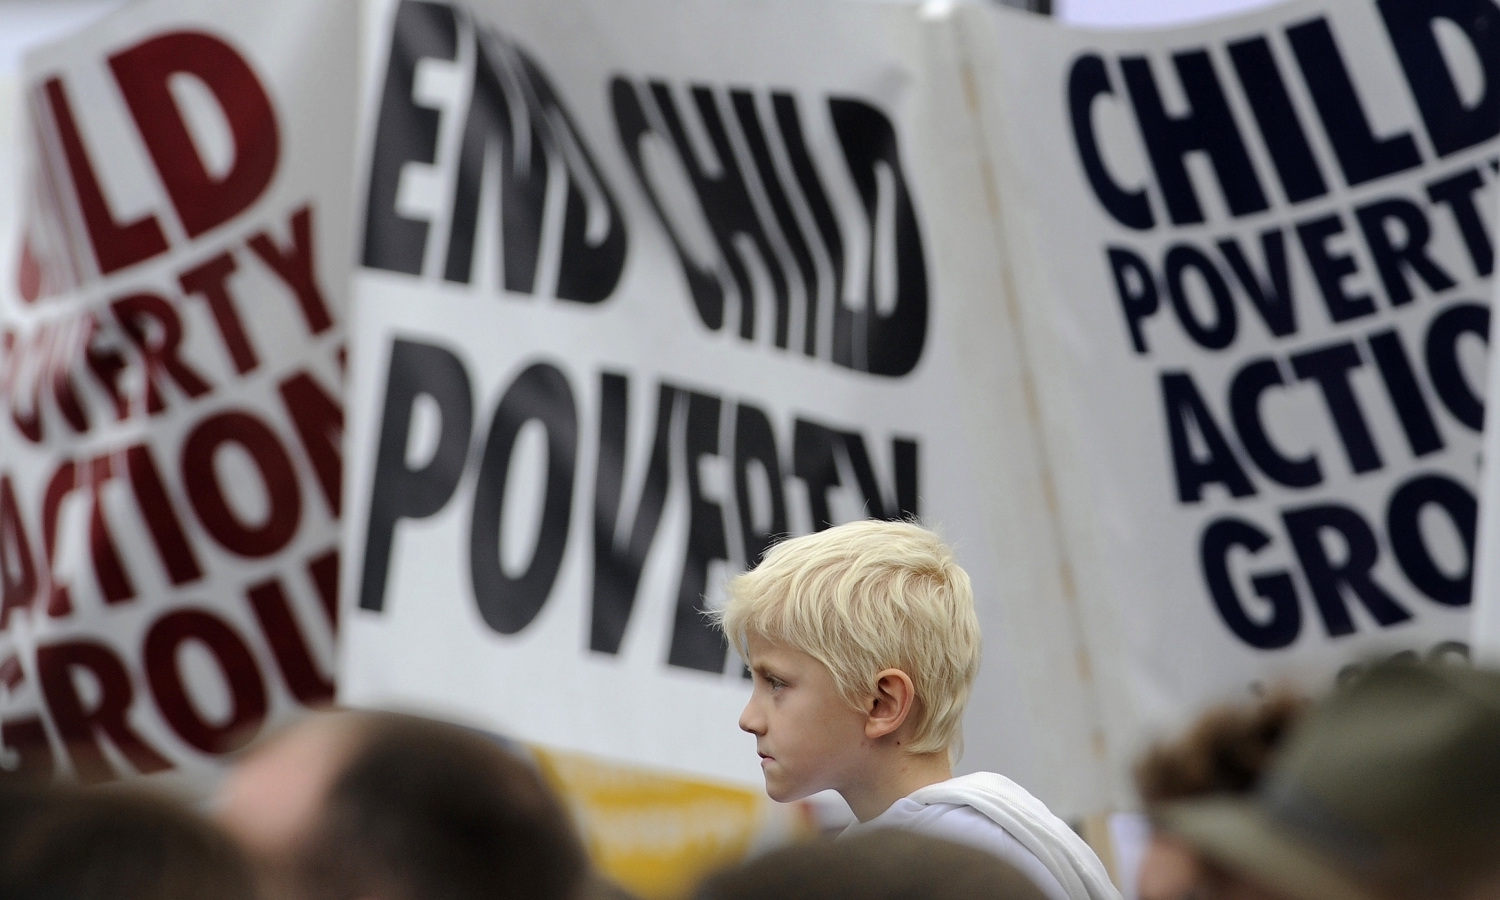 A junior-aged boy's profile is seen against a backdrop of banners reading 'End Child Poverty'